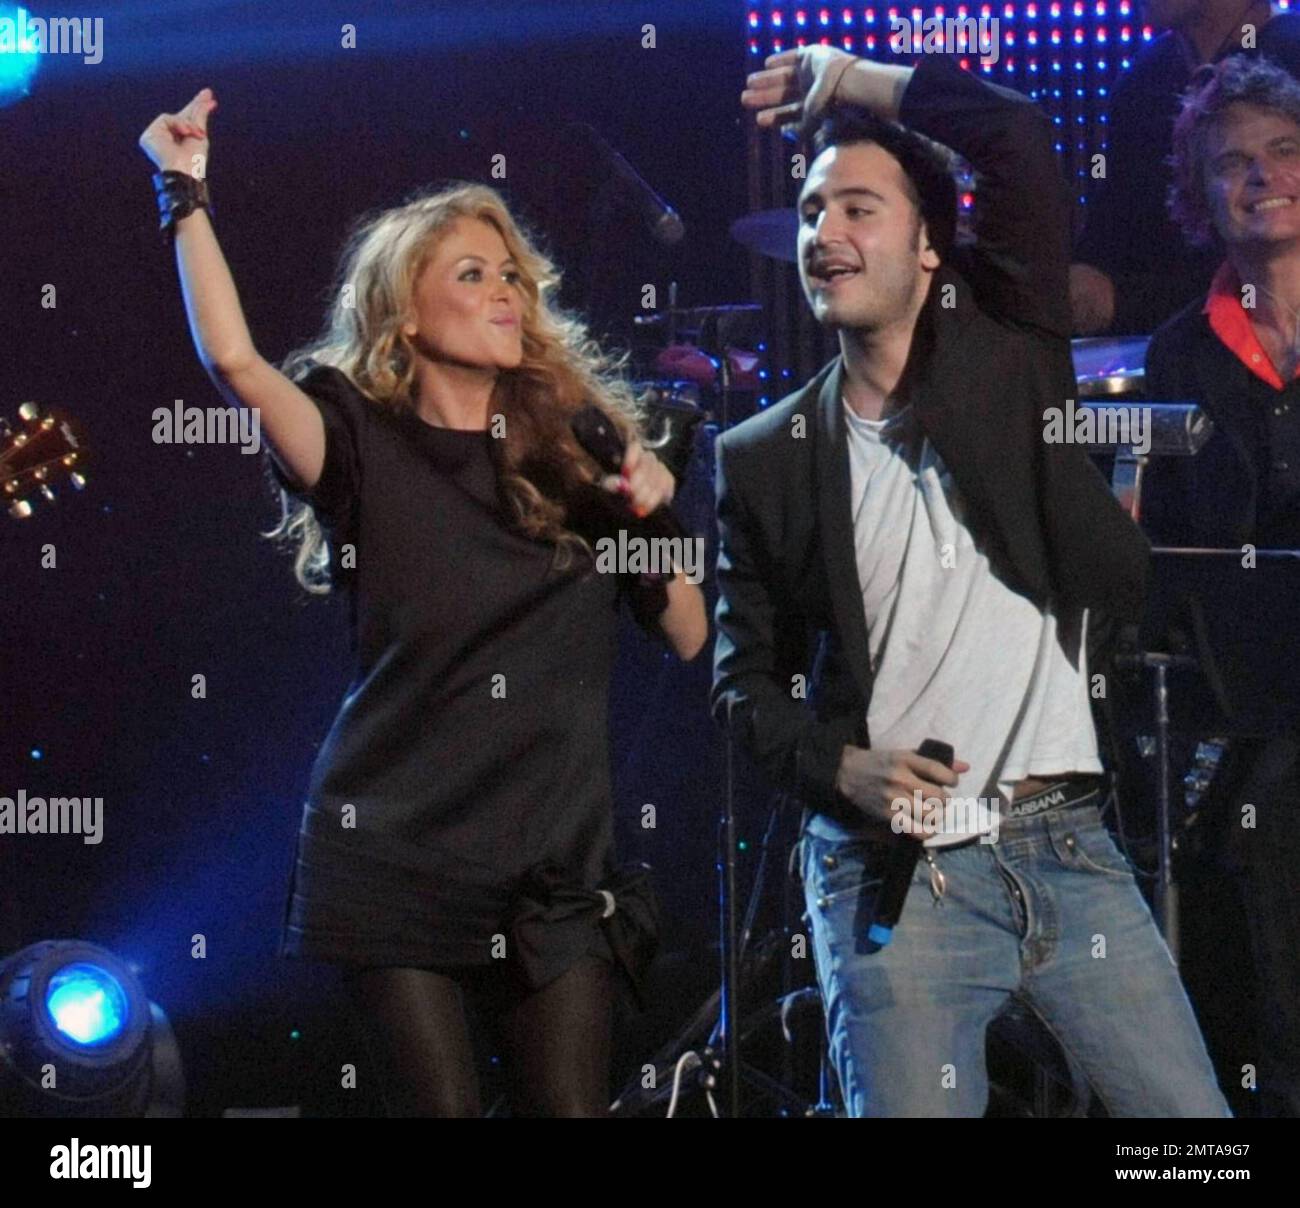 Pregnant Mexican pop star Paulina Rubio, 39, rocked it out live on